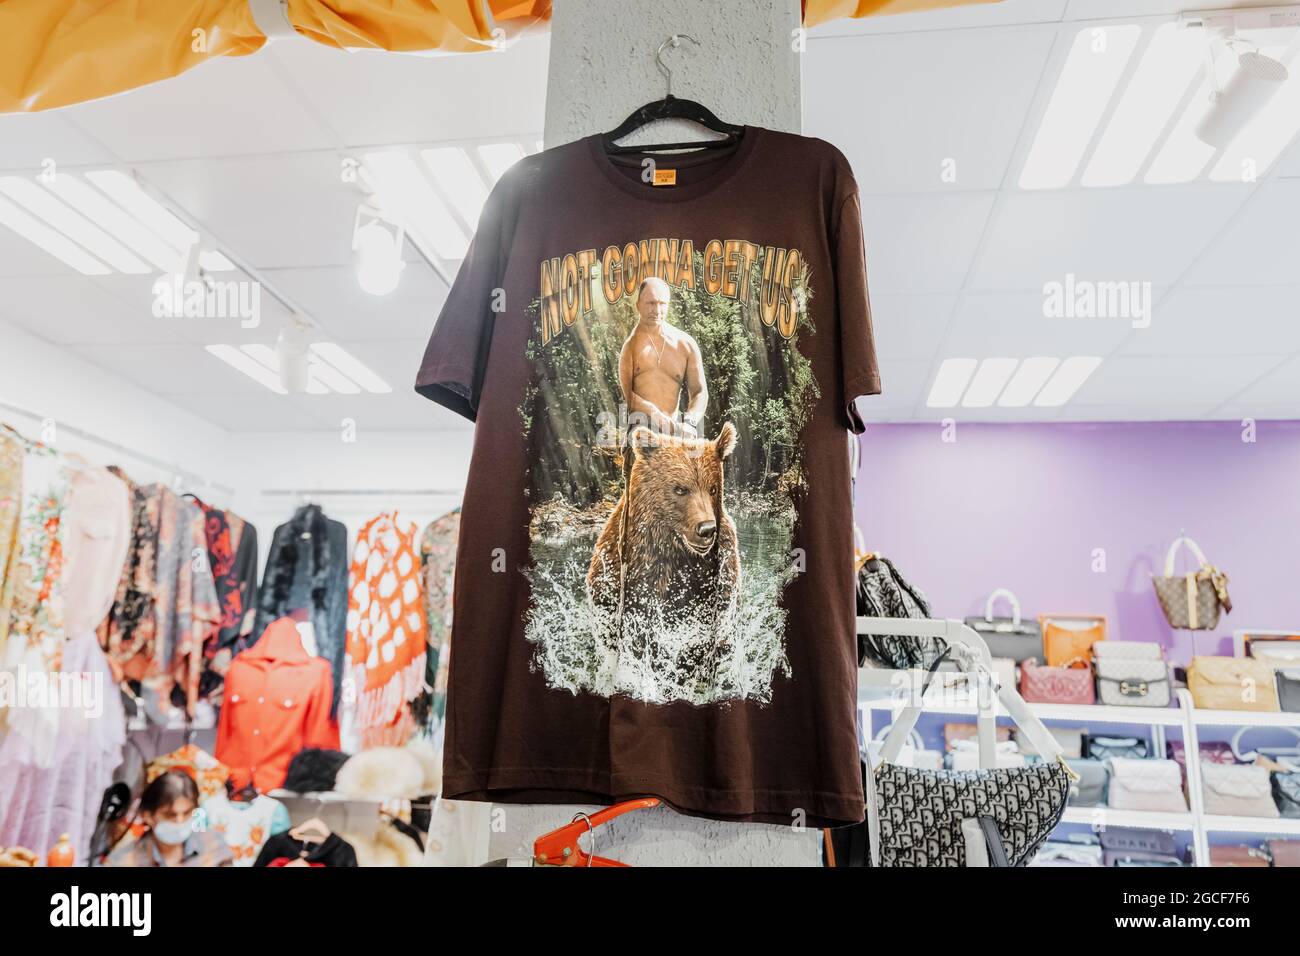 26 February 2021, UAE, Dubai: T-shirt with pucture of president Vladimir Putin riding on a wild bear is for sale in russian souvenir shop Stock Photo